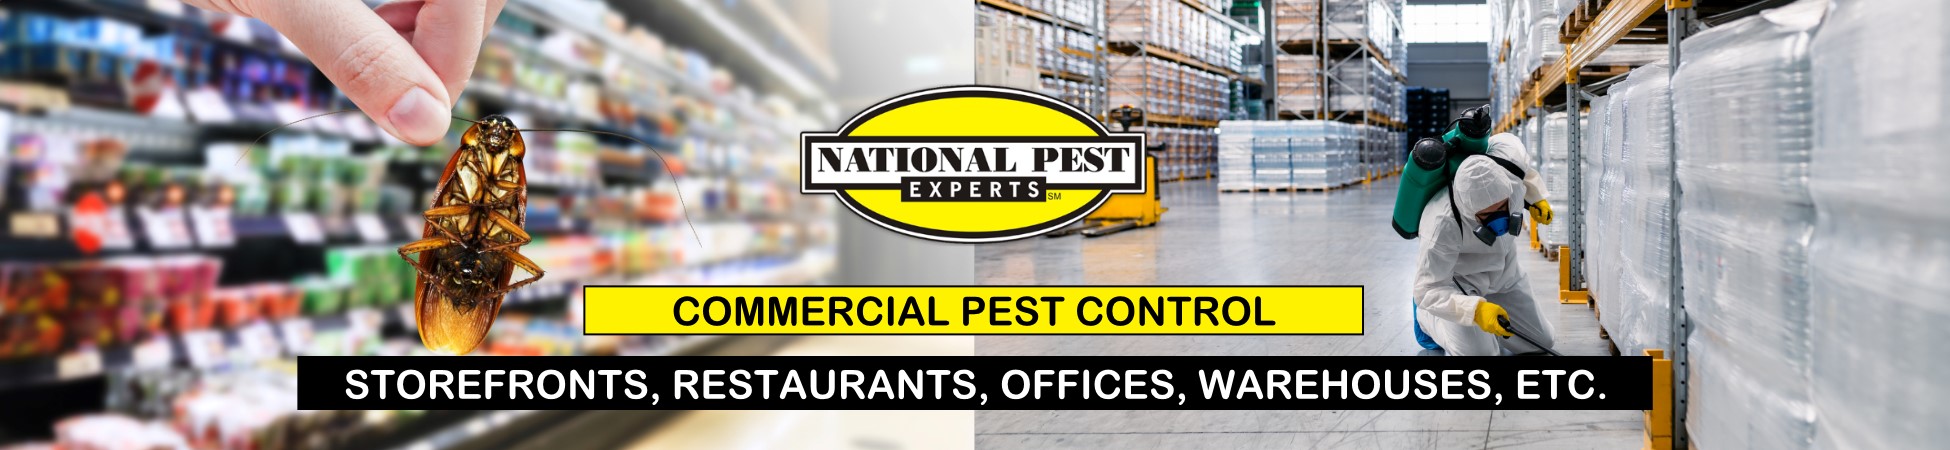 National Pest Experts - Commercial & Industrial exterminating and pest control in Muttontown, NY